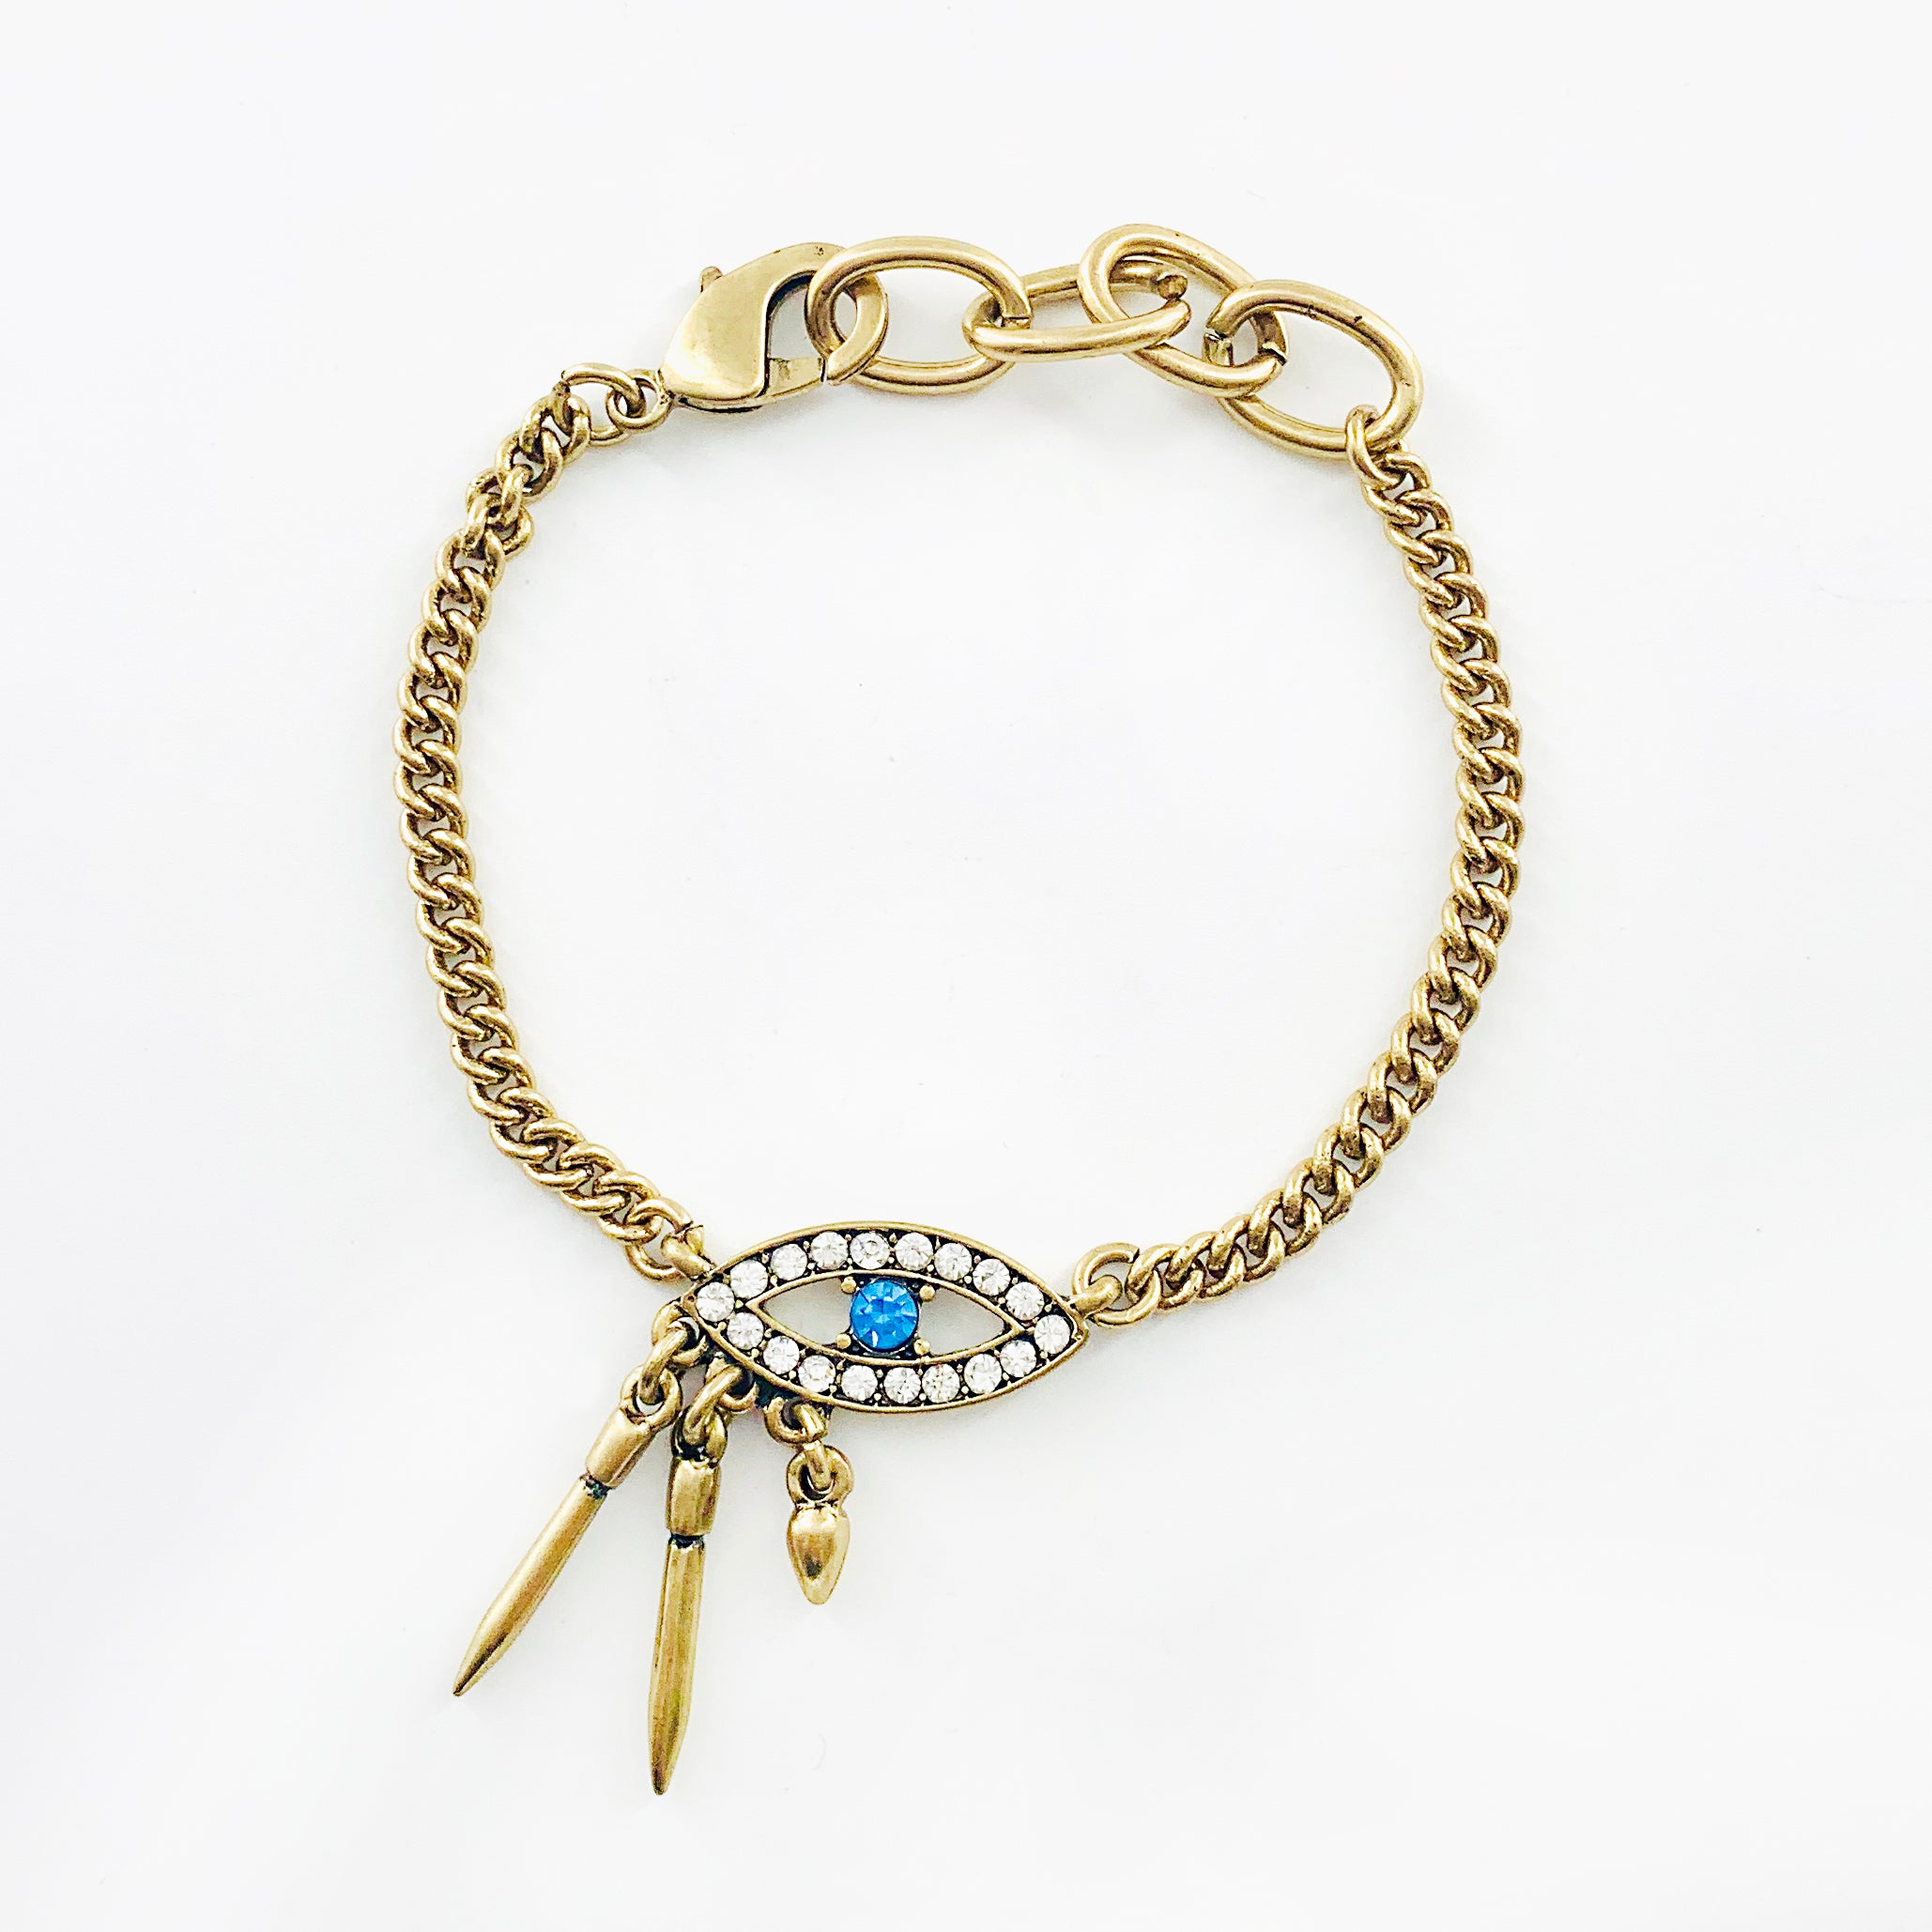 Vintage-styled gold chain with diamante blue eye